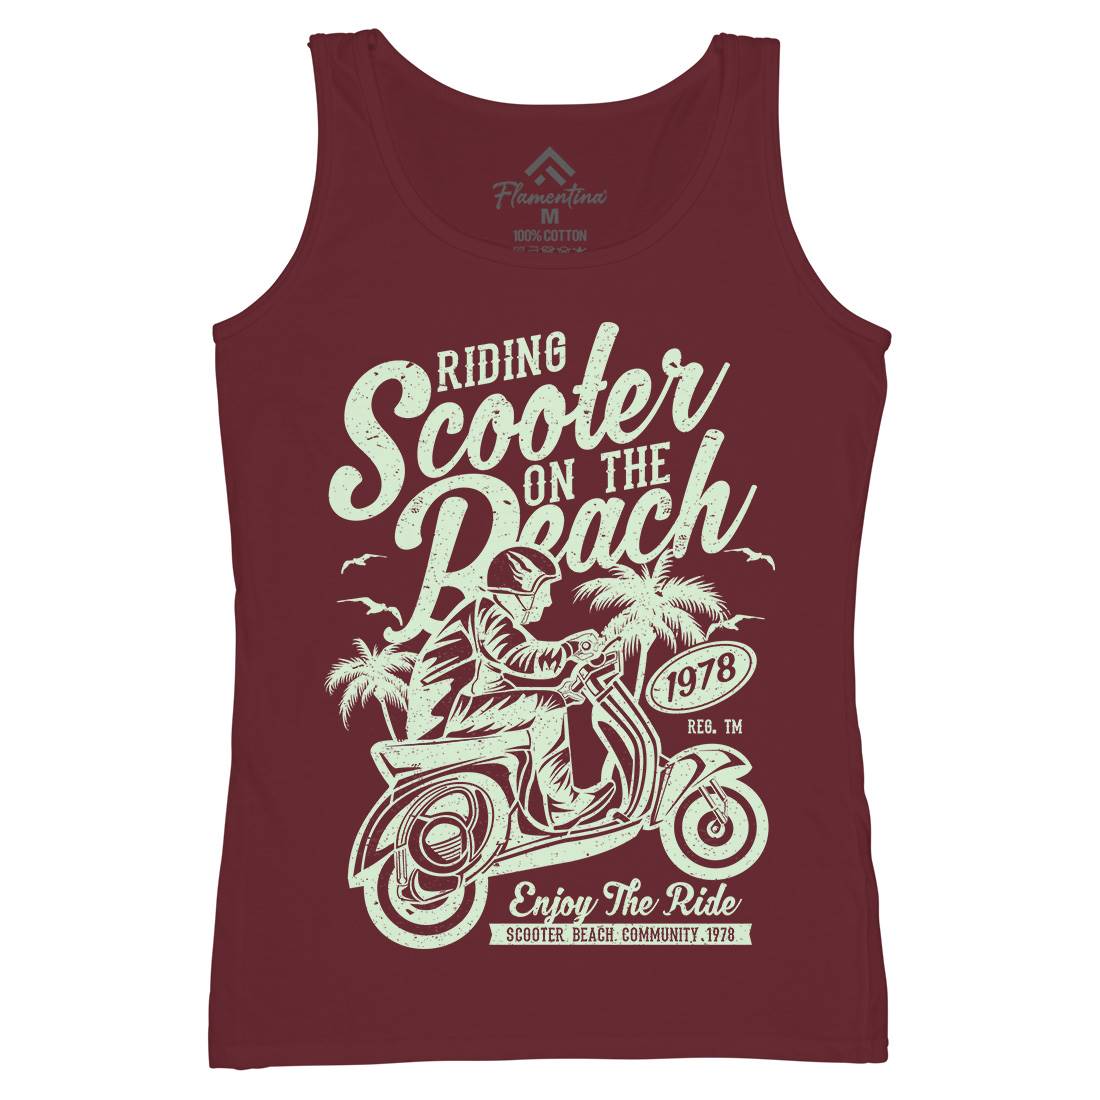 Scooter Beach Womens Organic Tank Top Vest Motorcycles A134